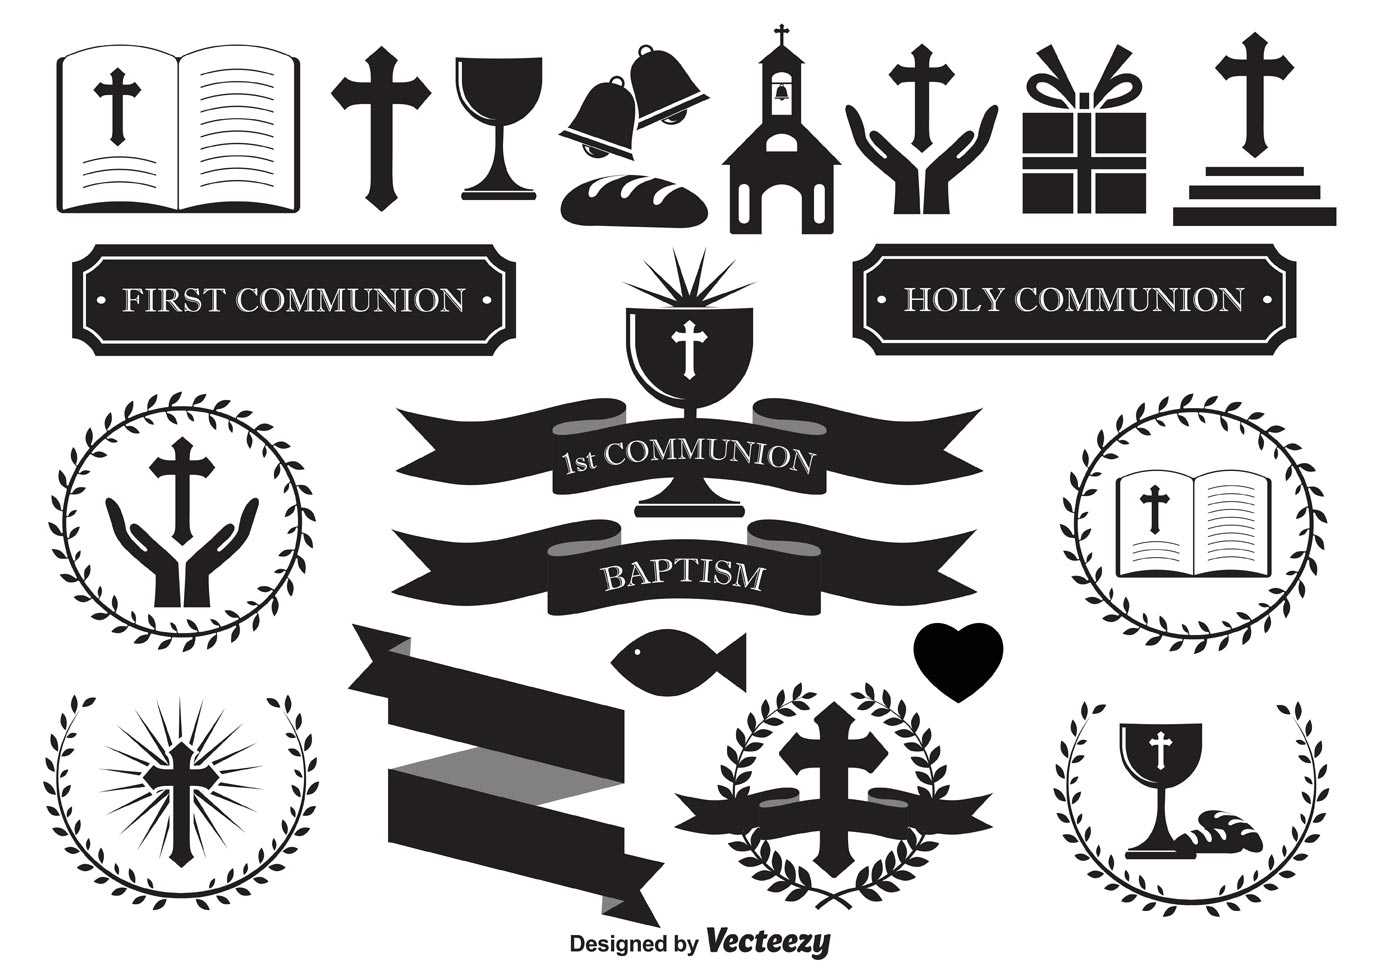 First Communion Free Vector Art – (882 Free Downloads) Pertaining To First Communion Banner Templates